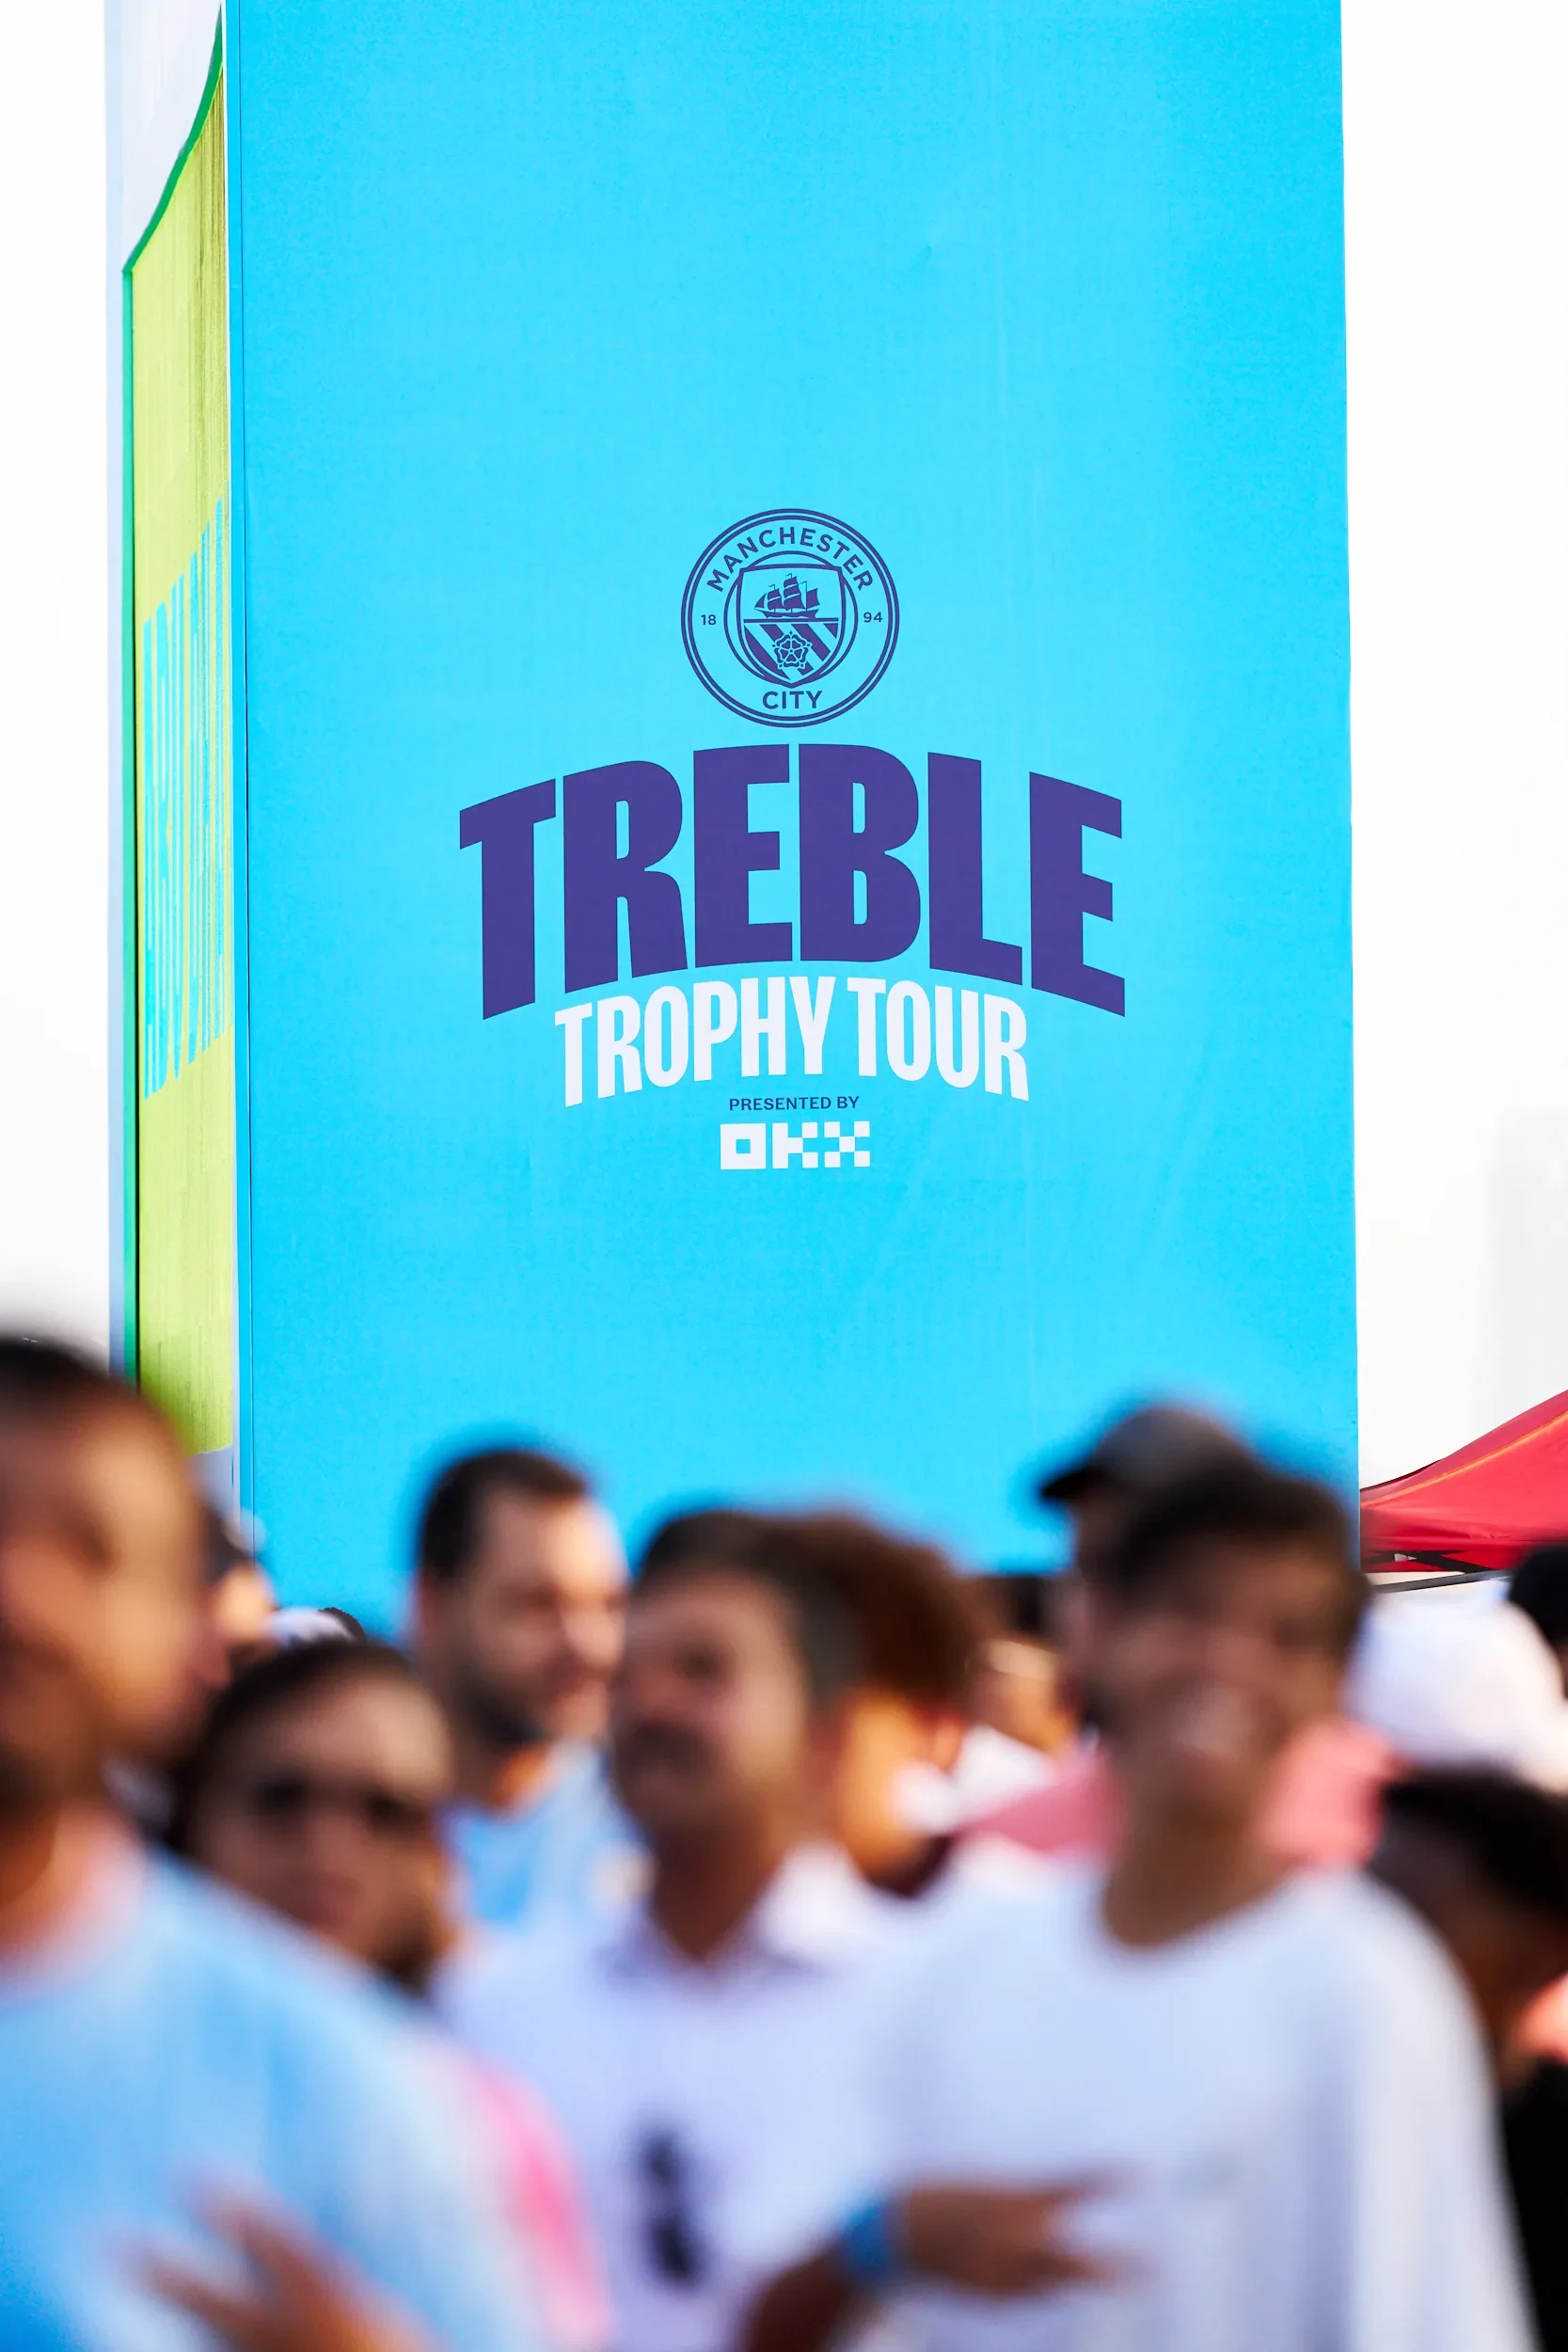 Manchester City Treble Trophy Tour in Abu Dhabi, Presented by OKX